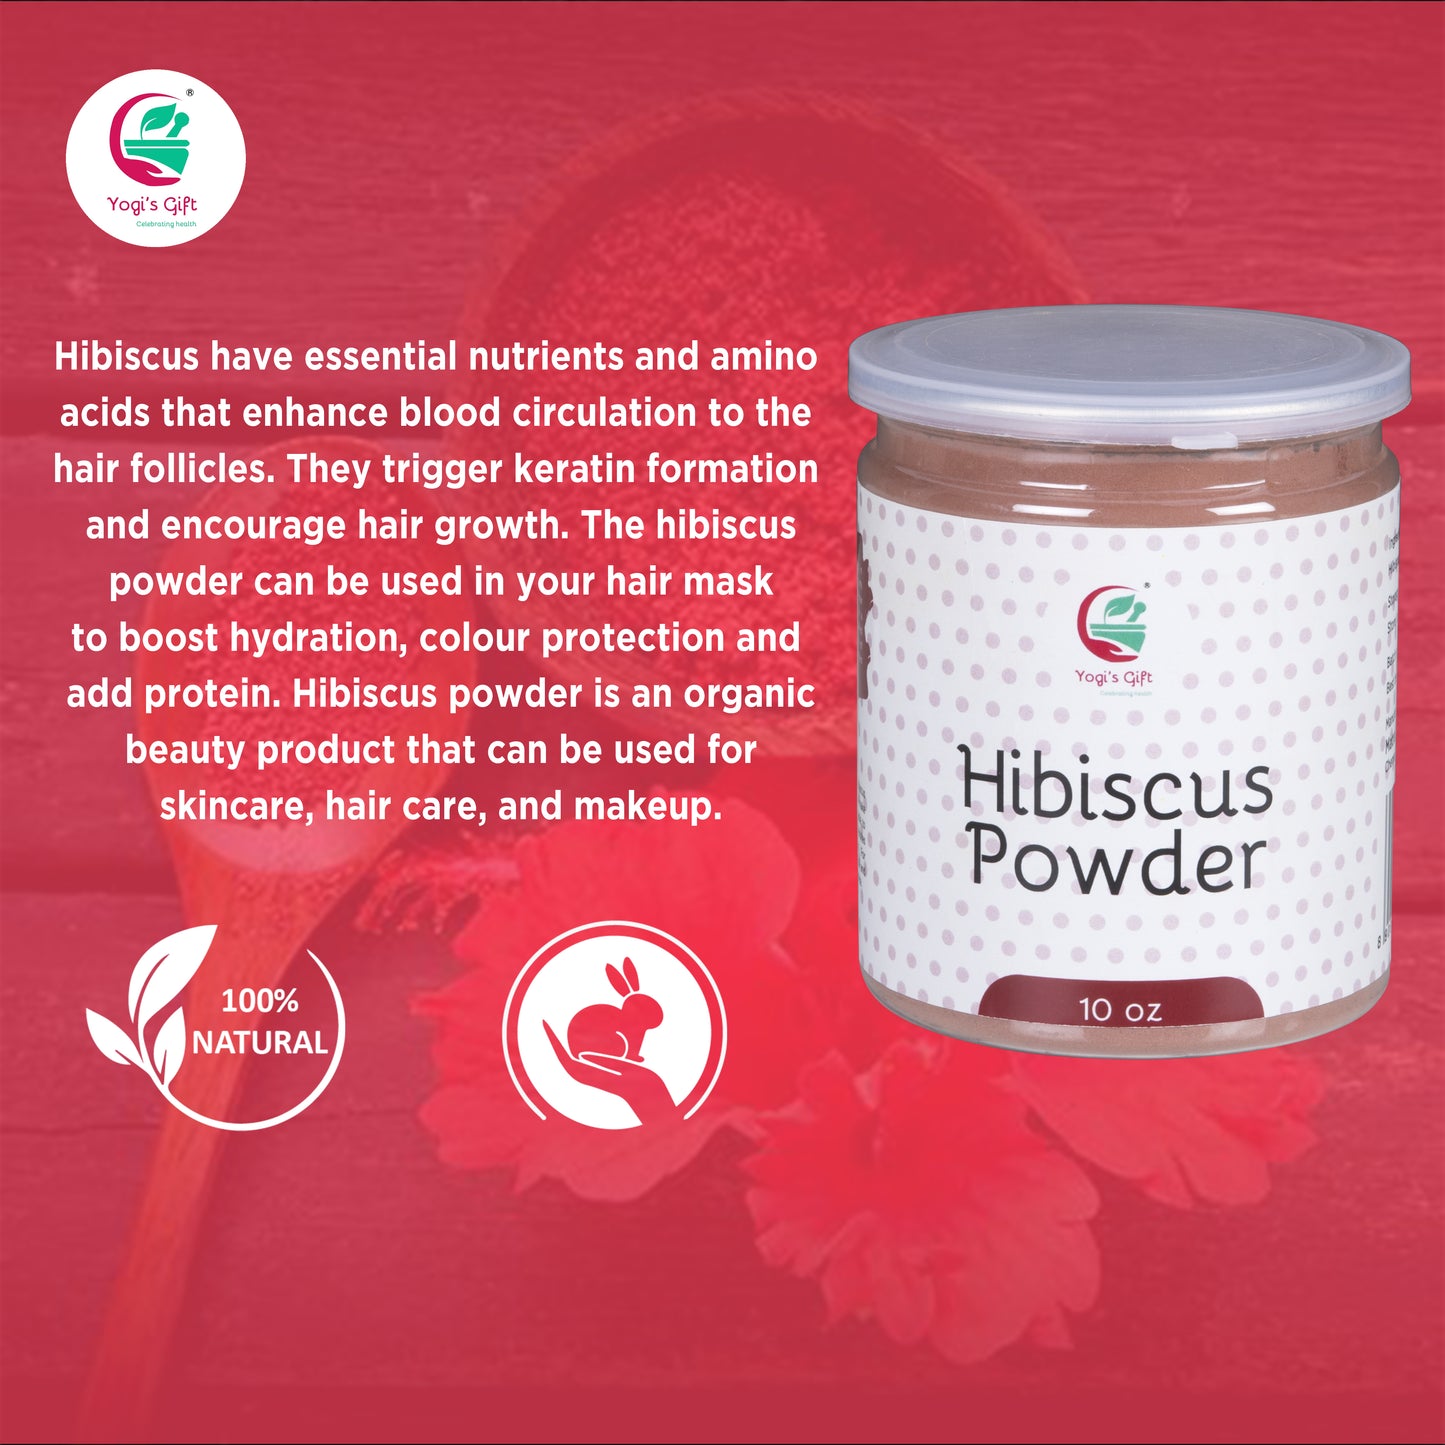 Hibiscus Powder 10 oz | 100% Natural and Pure Hibiscus Powder for Hair Growth | by Yogi's Gift®